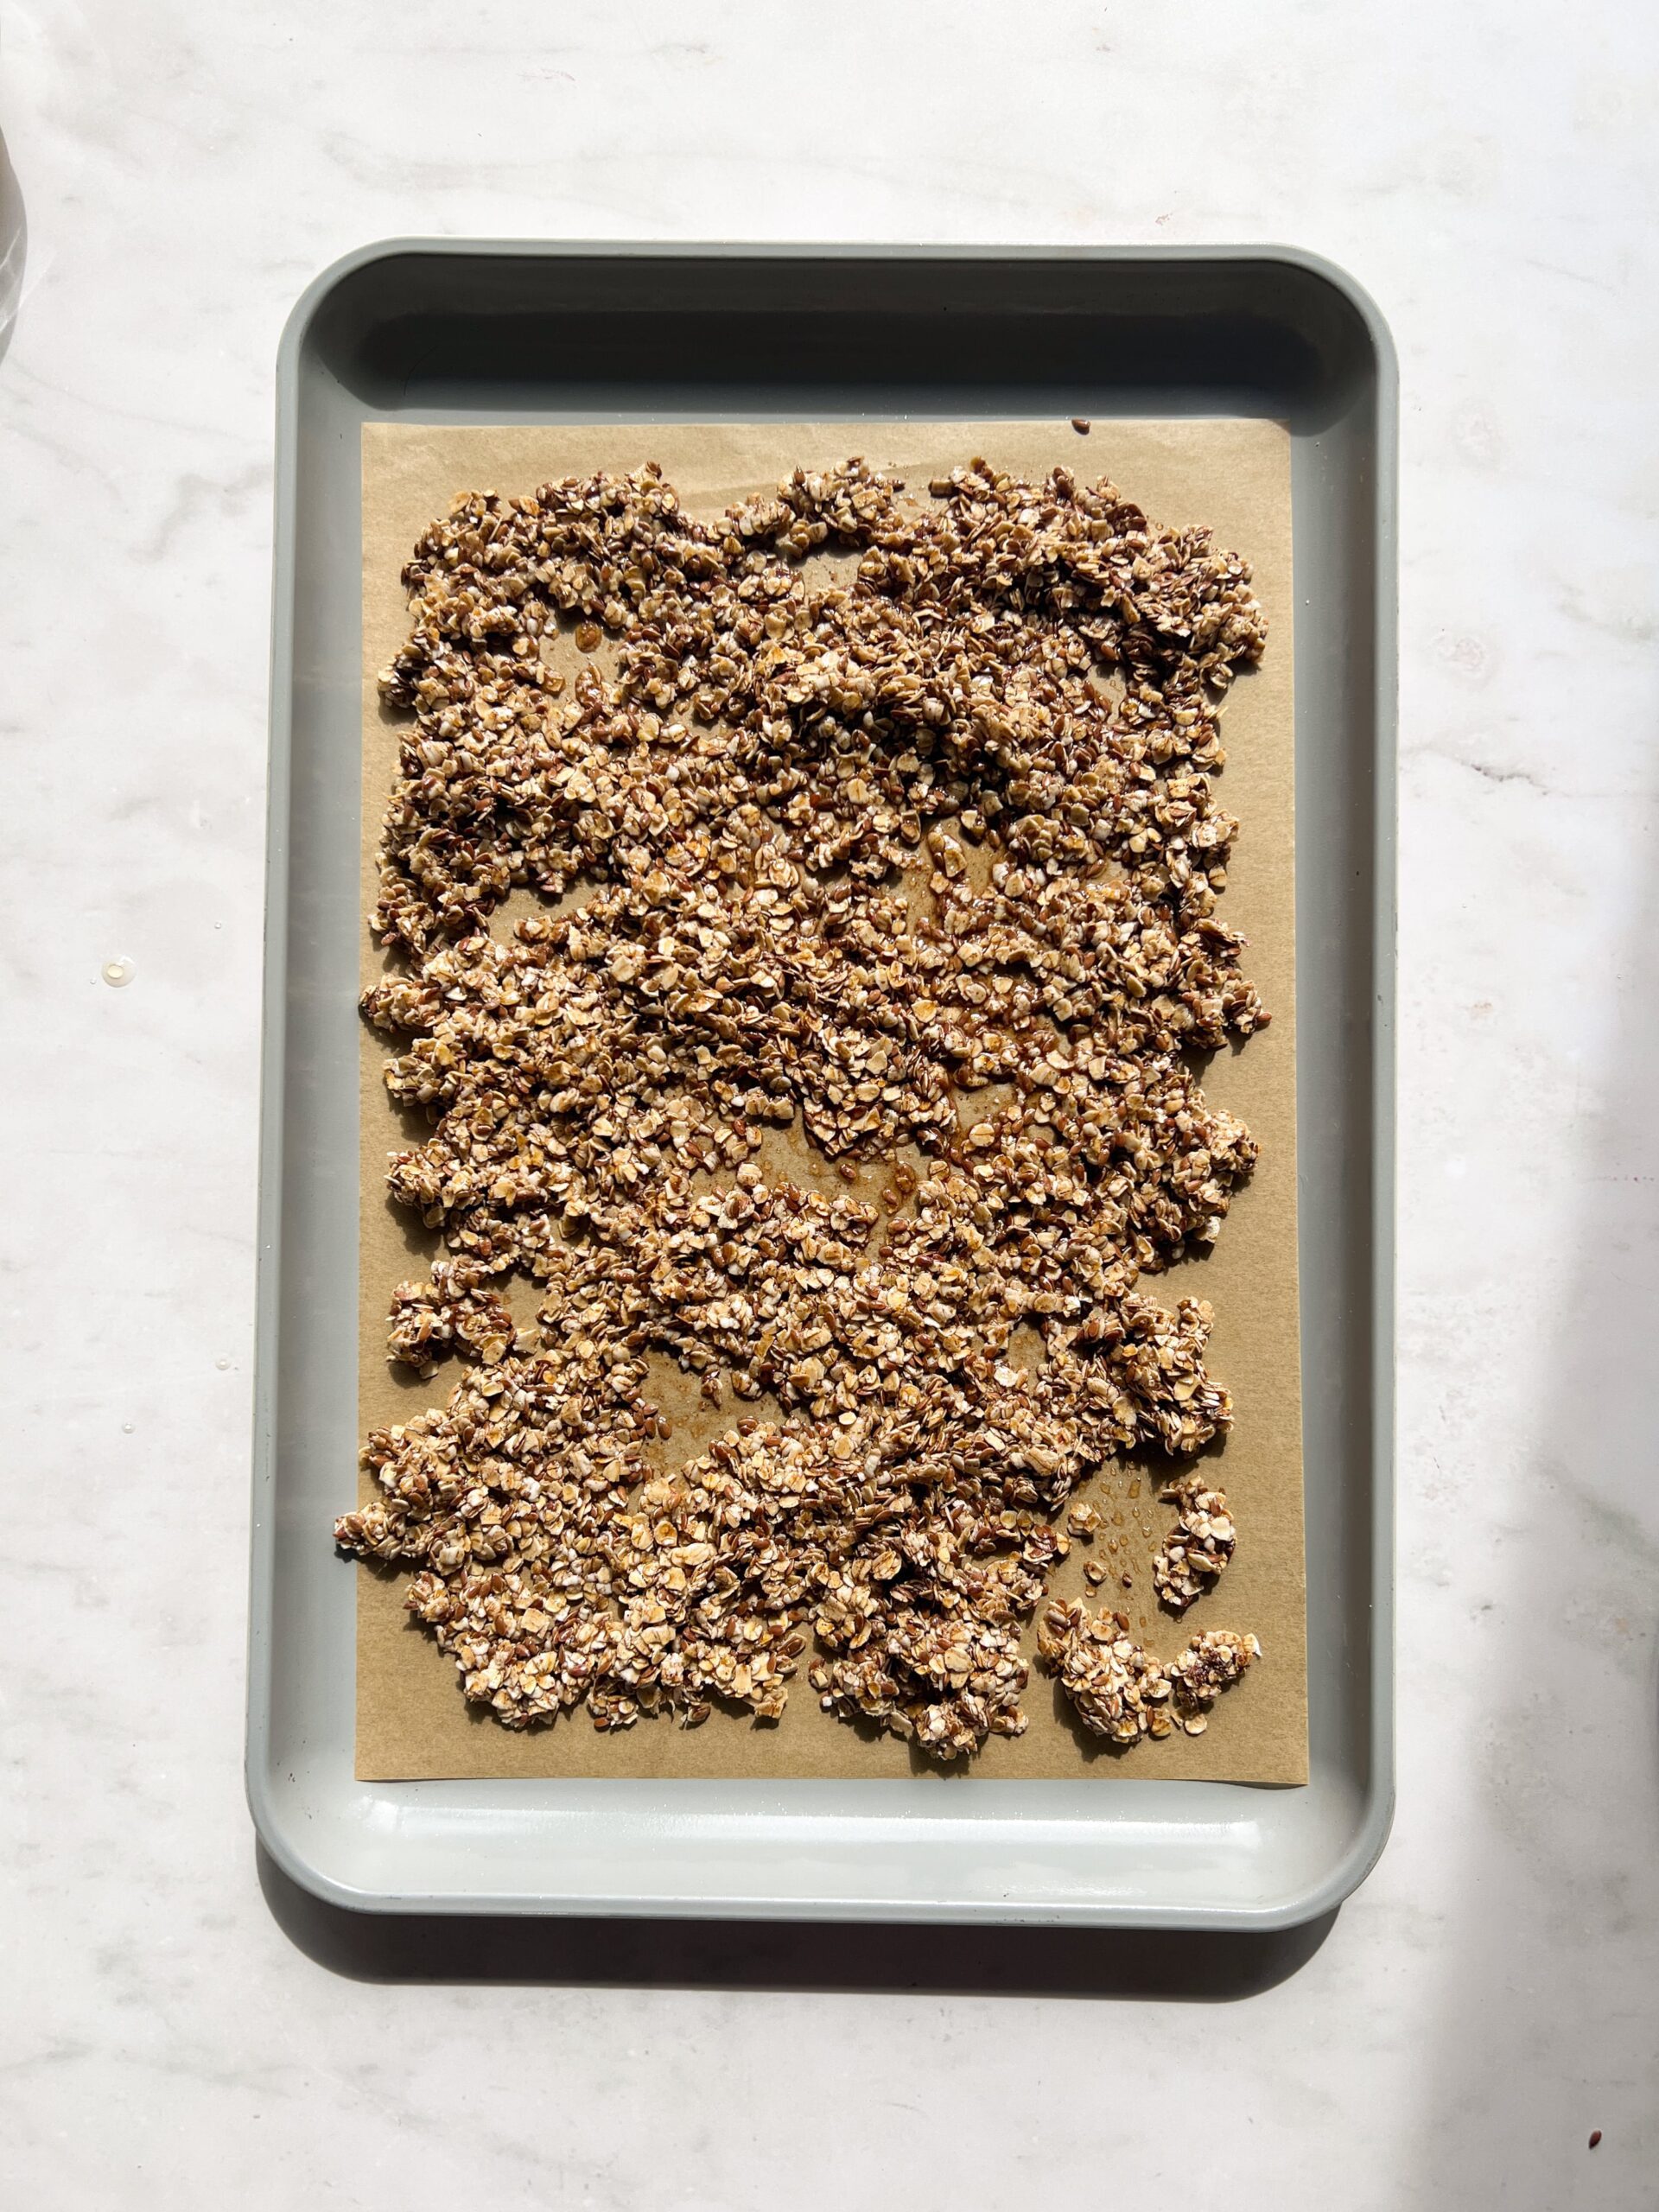 granola spread on a baking sheet before being toasted